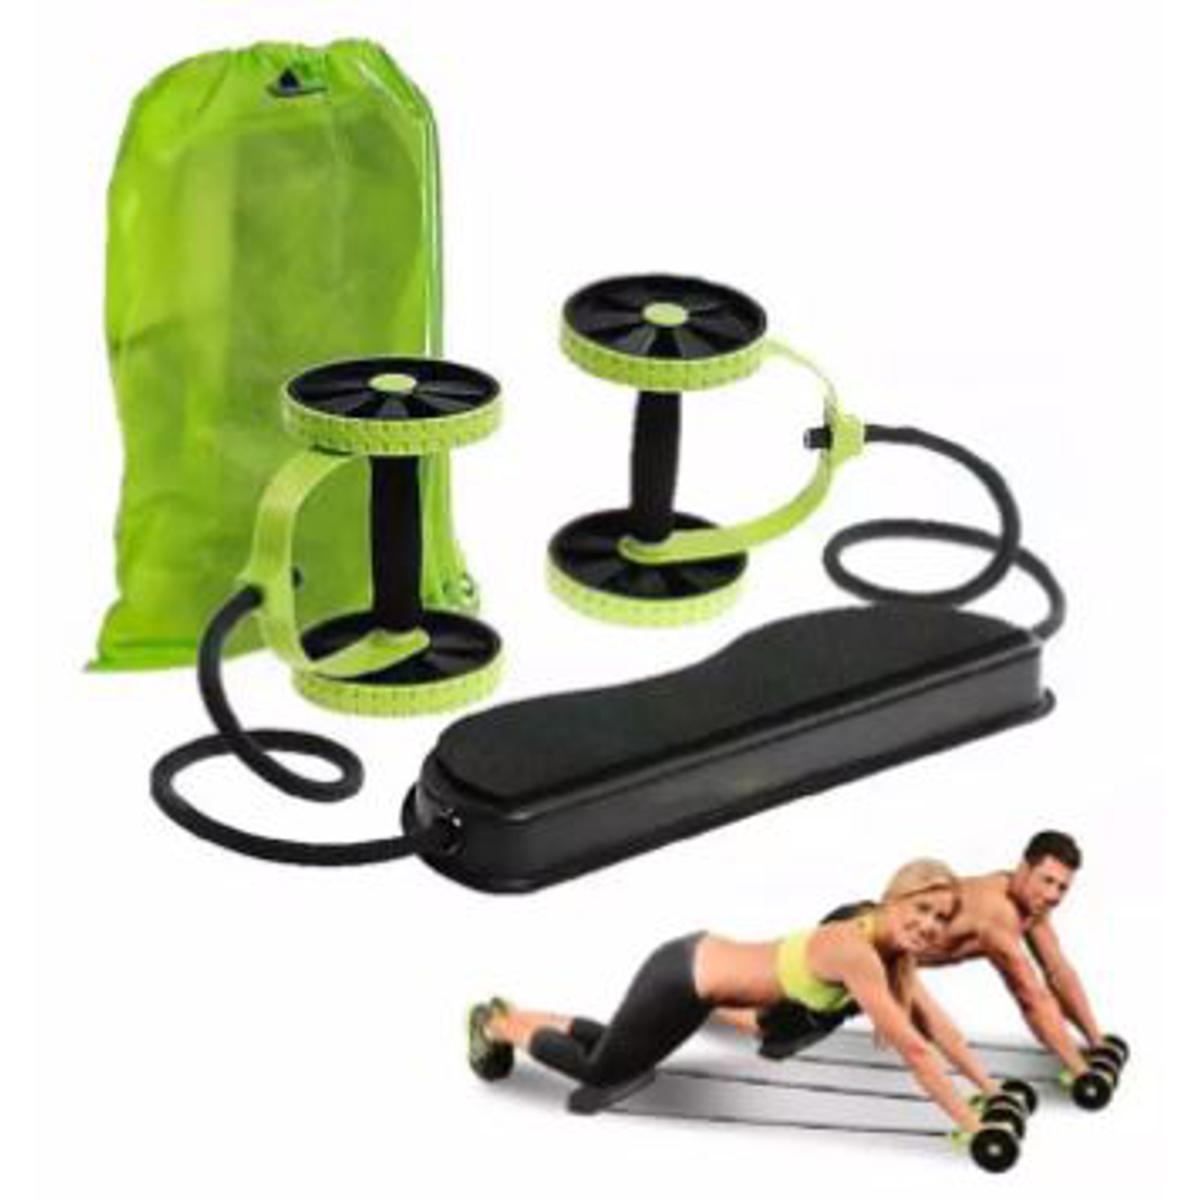 Revoflex Xtreme fine Quality Revoflex Xtreme Workout machine for home, Total body fitness Gym -Xtreme Abs Trainer Resistant - All in One Portable Abs,